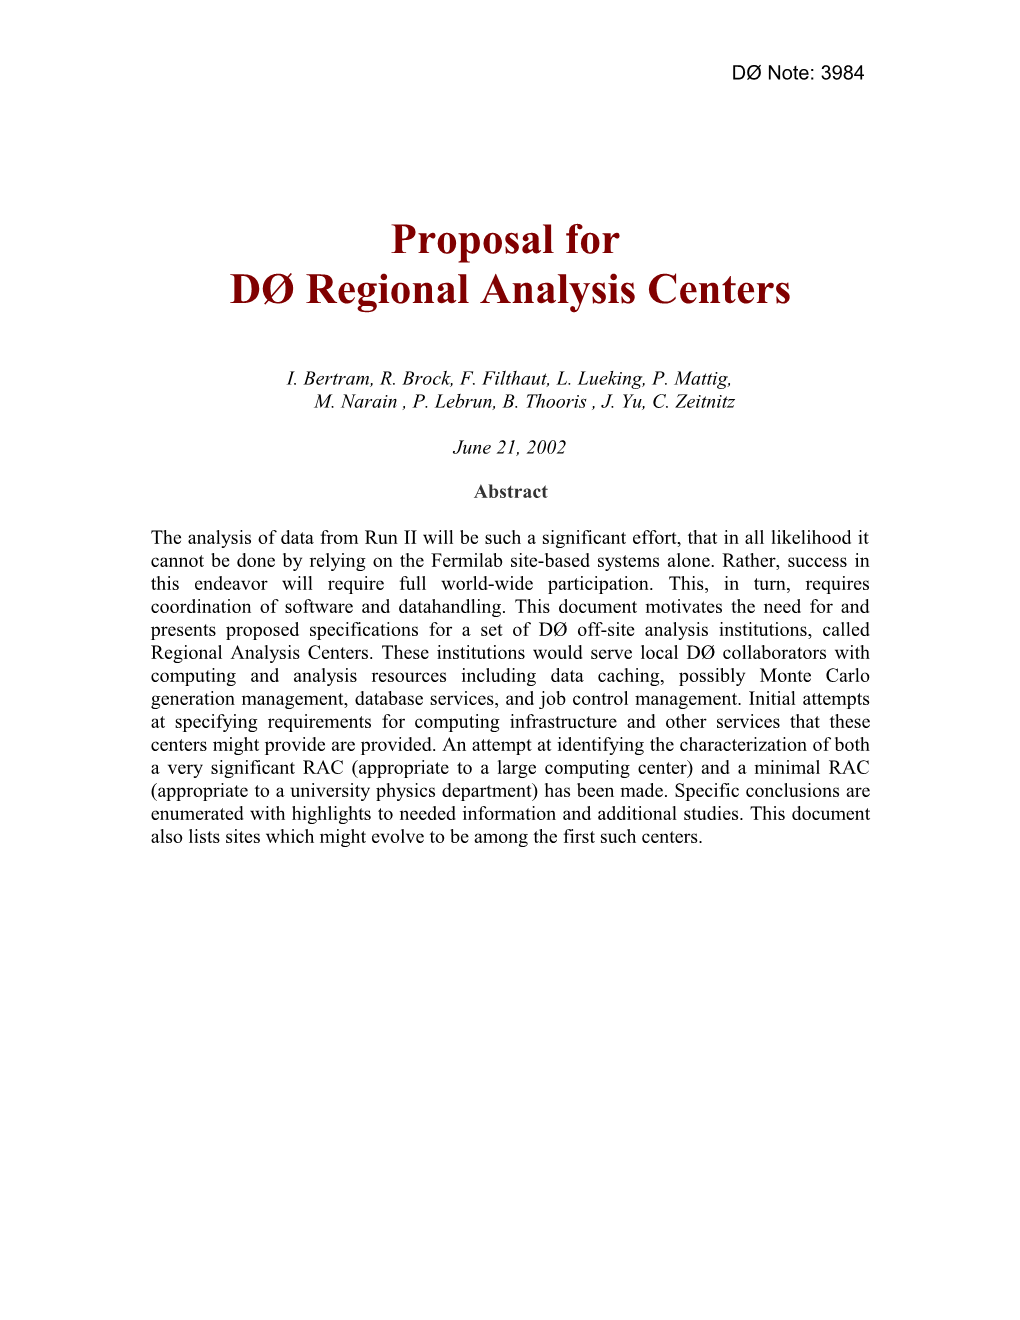 Specifications for DØ Regional Analysis Centers